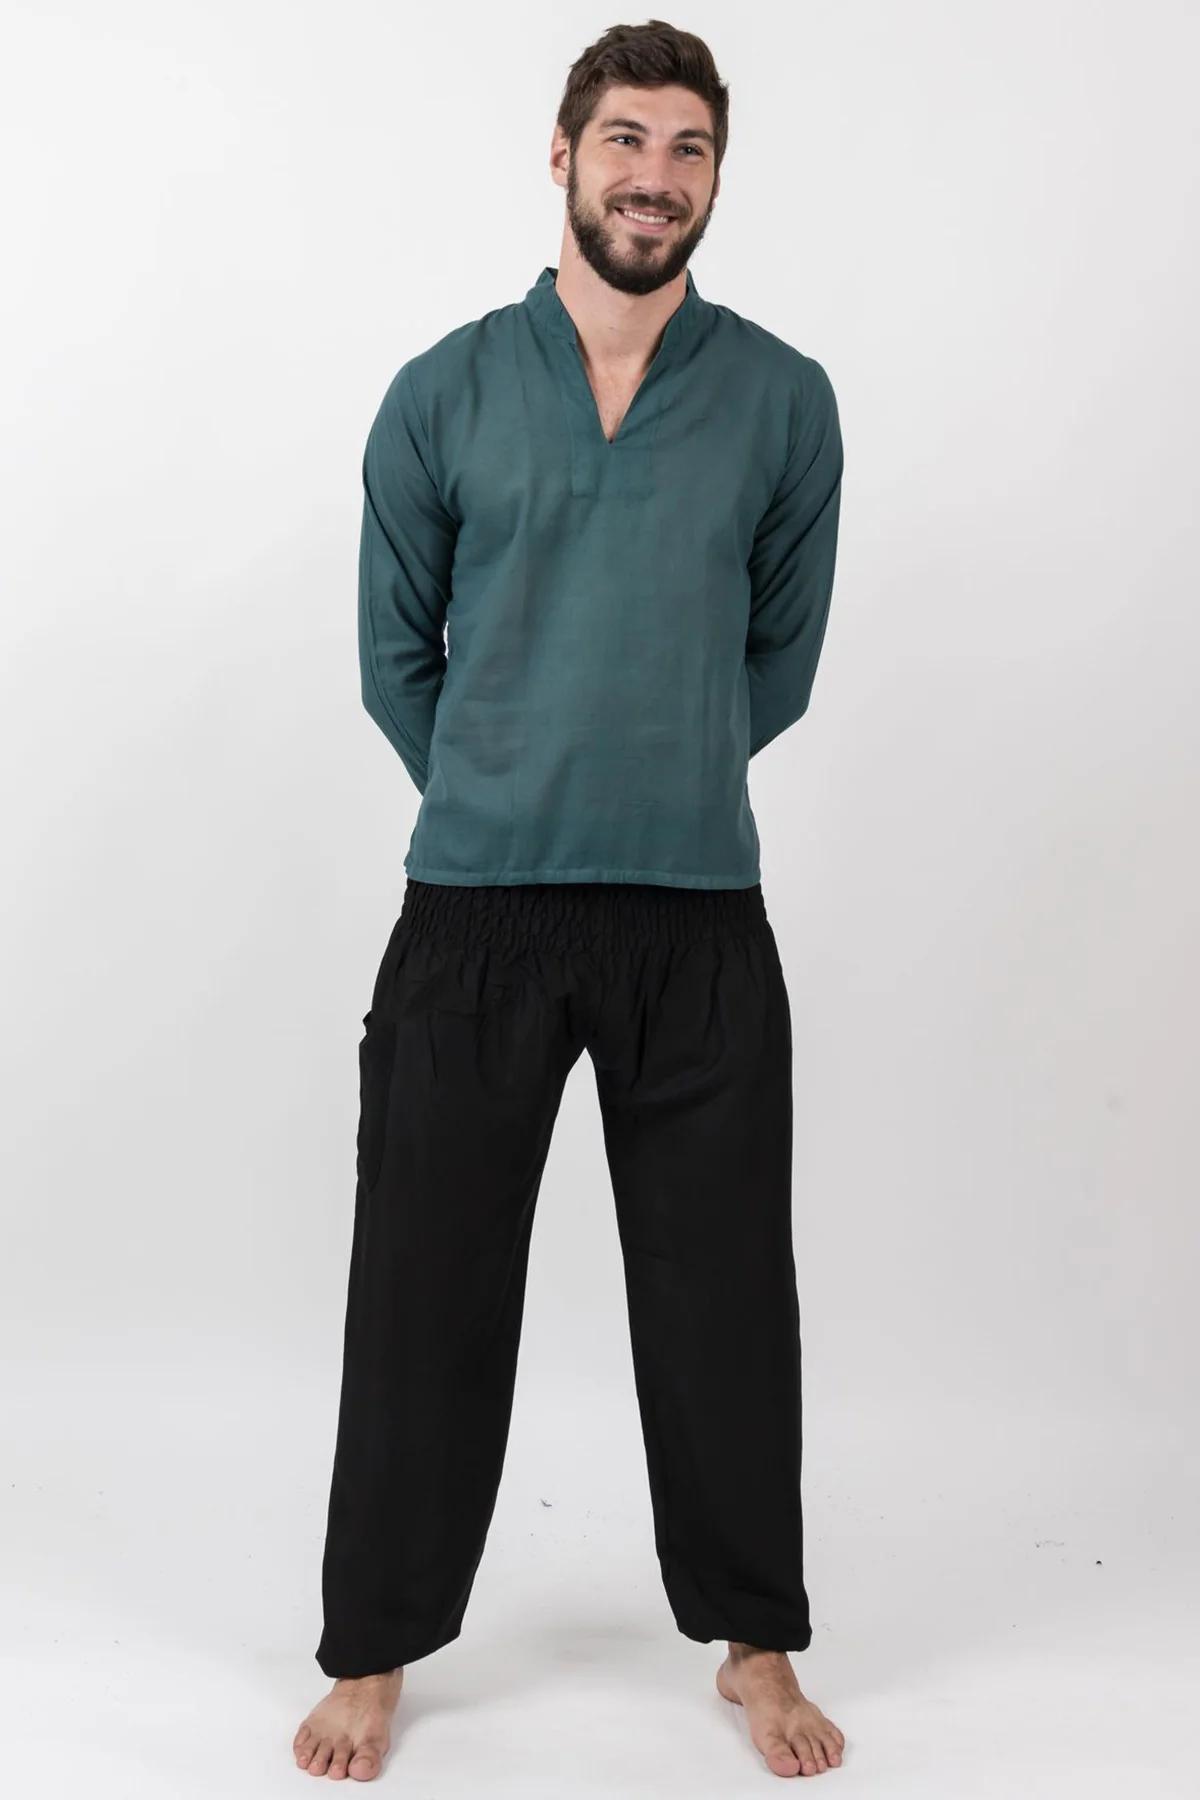 mens yoga shirt - What material shirt is best for hot yoga